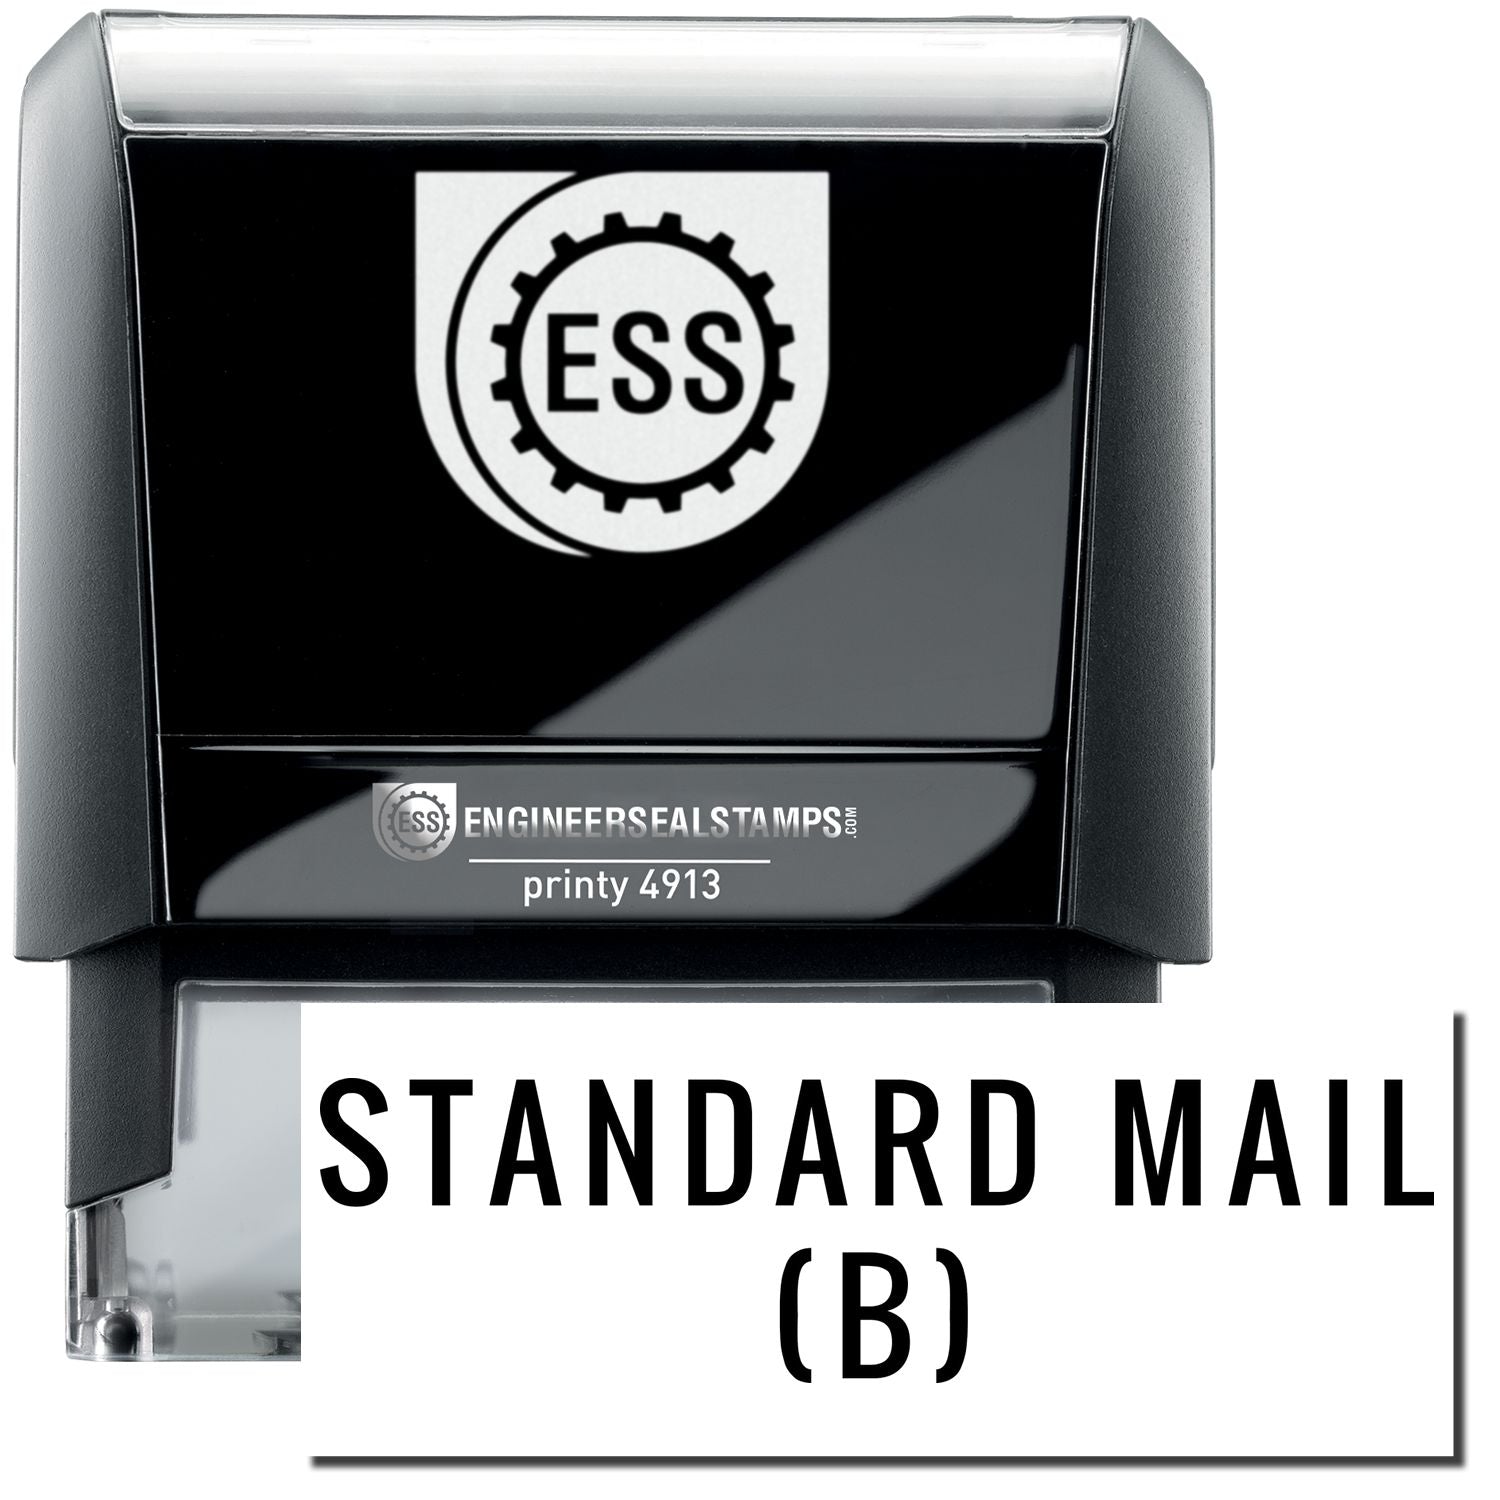 A self-inking stamp with a stamped image showing how the text "STANDARD MAIL (B)" in a large font is displayed by it after stamping.